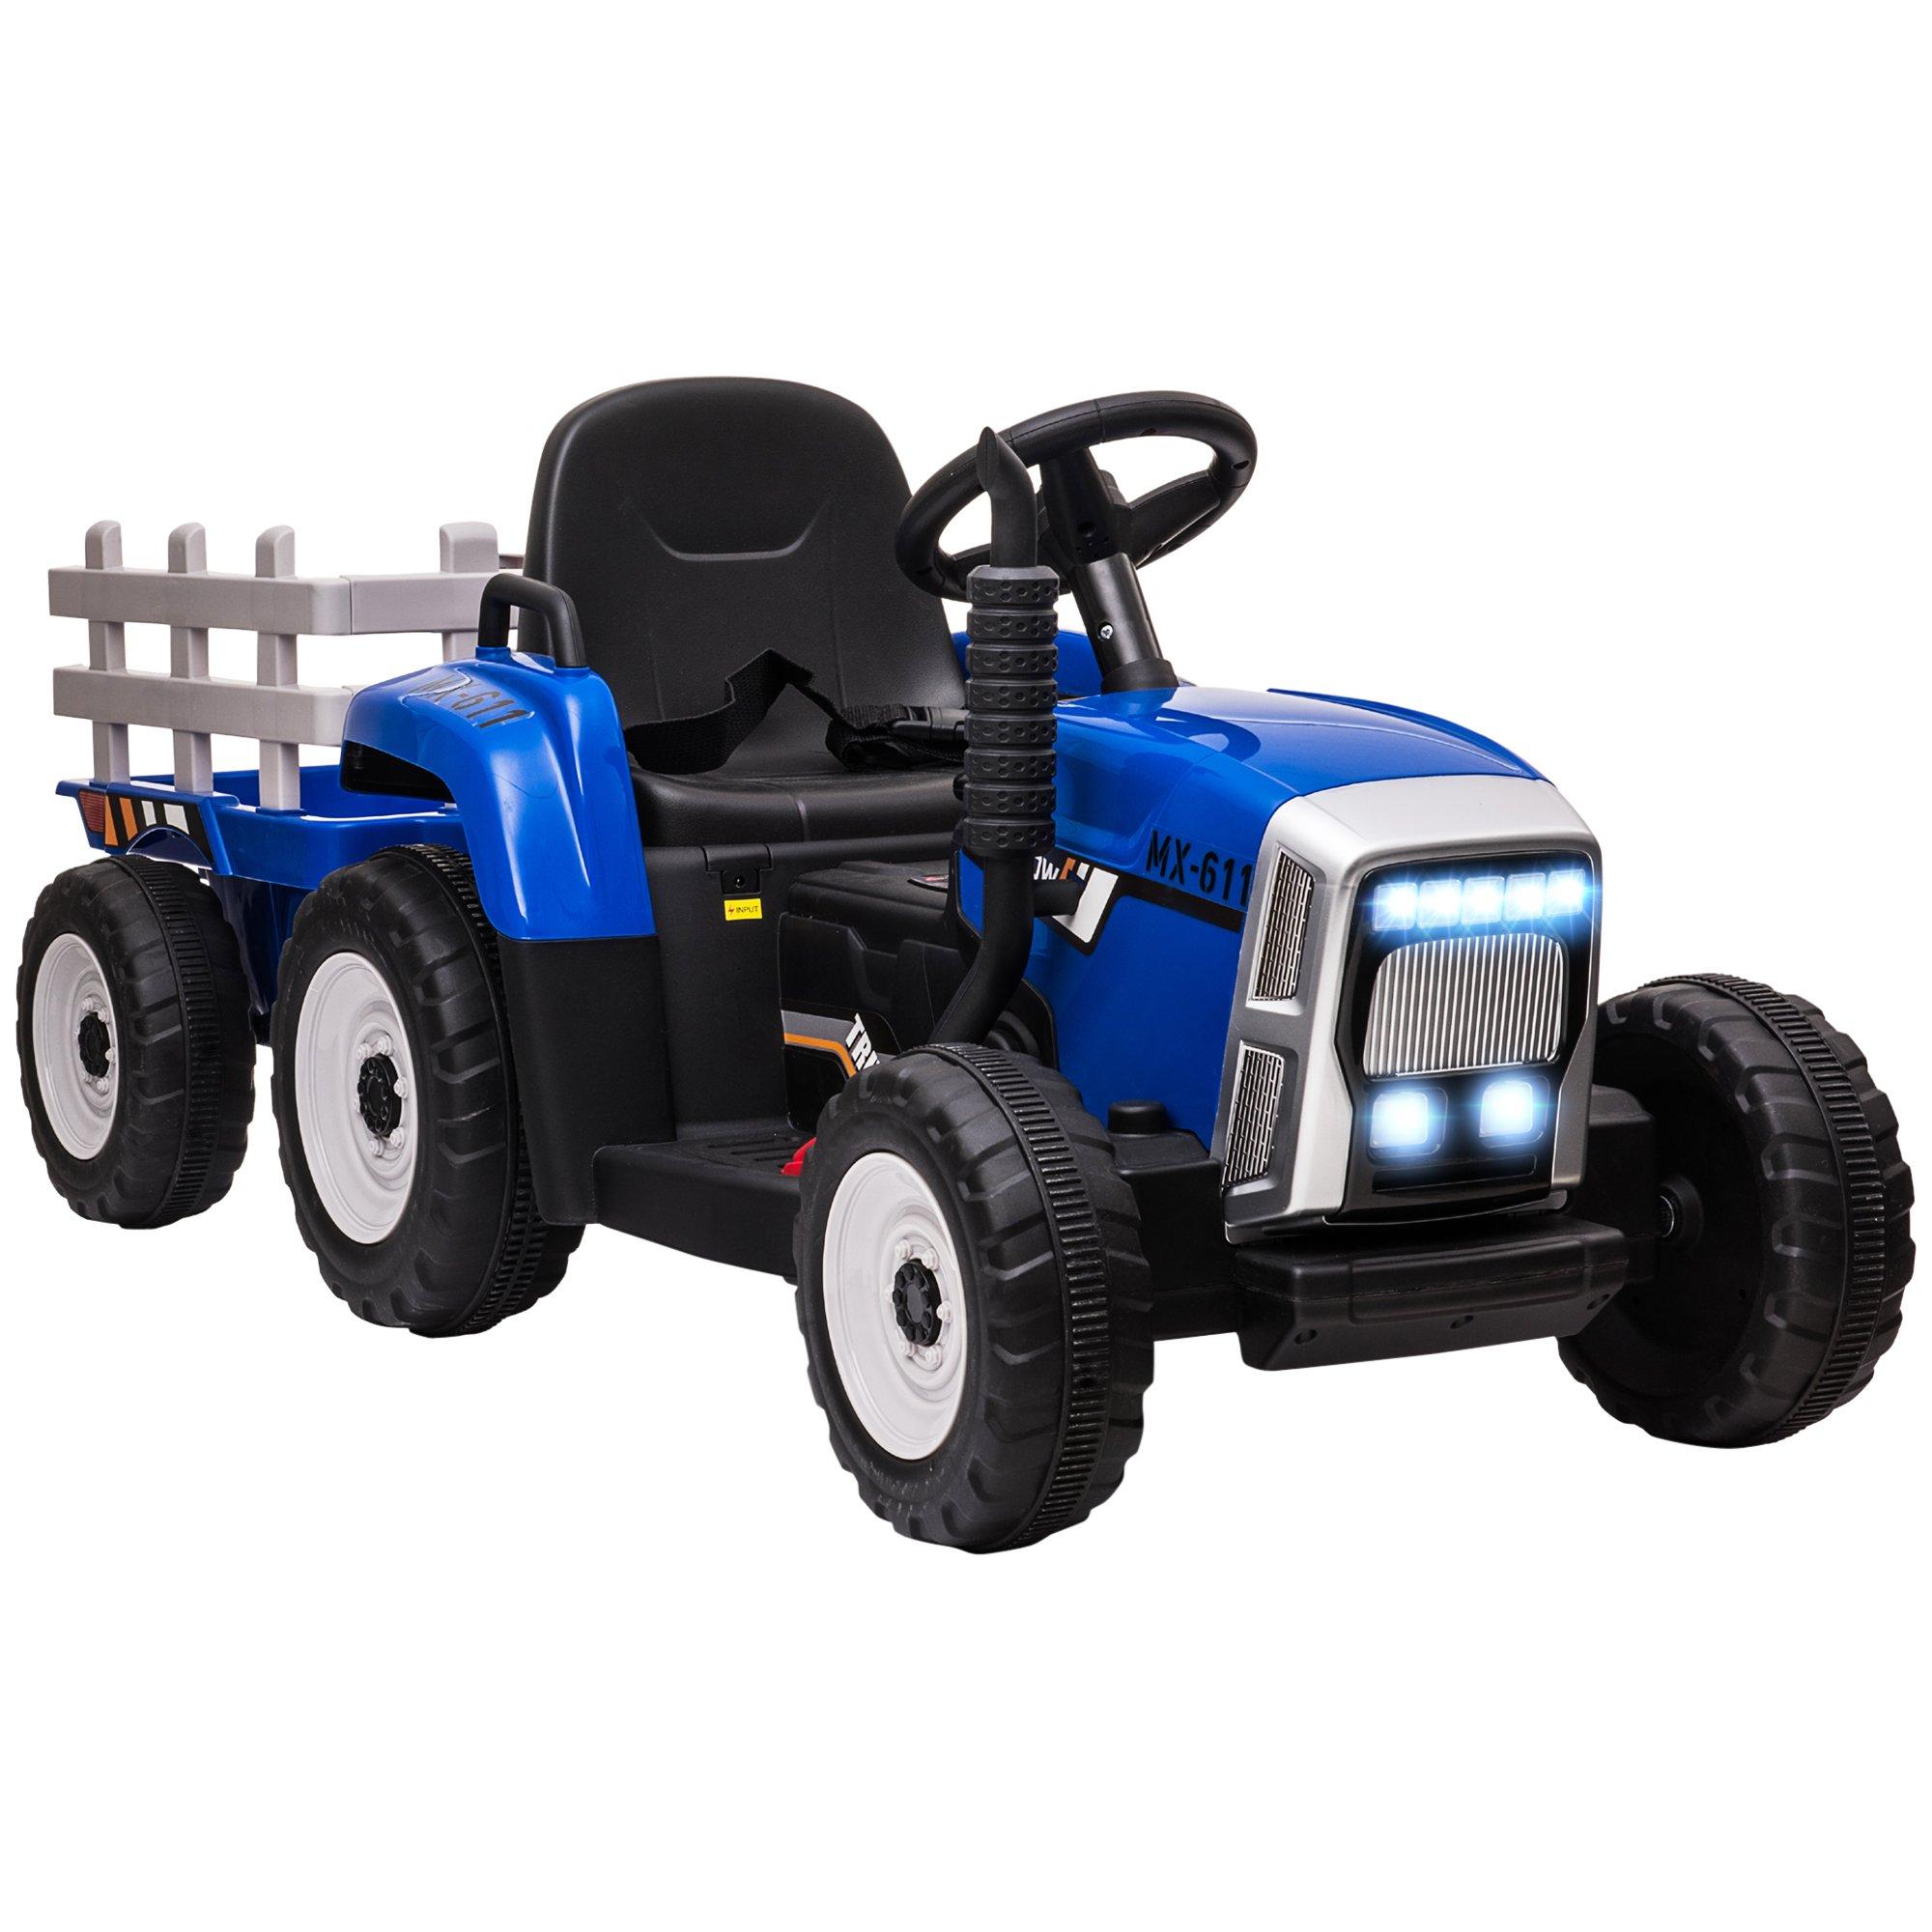 Ride on Tractor with Trailer, Remote Control, Start up Sound